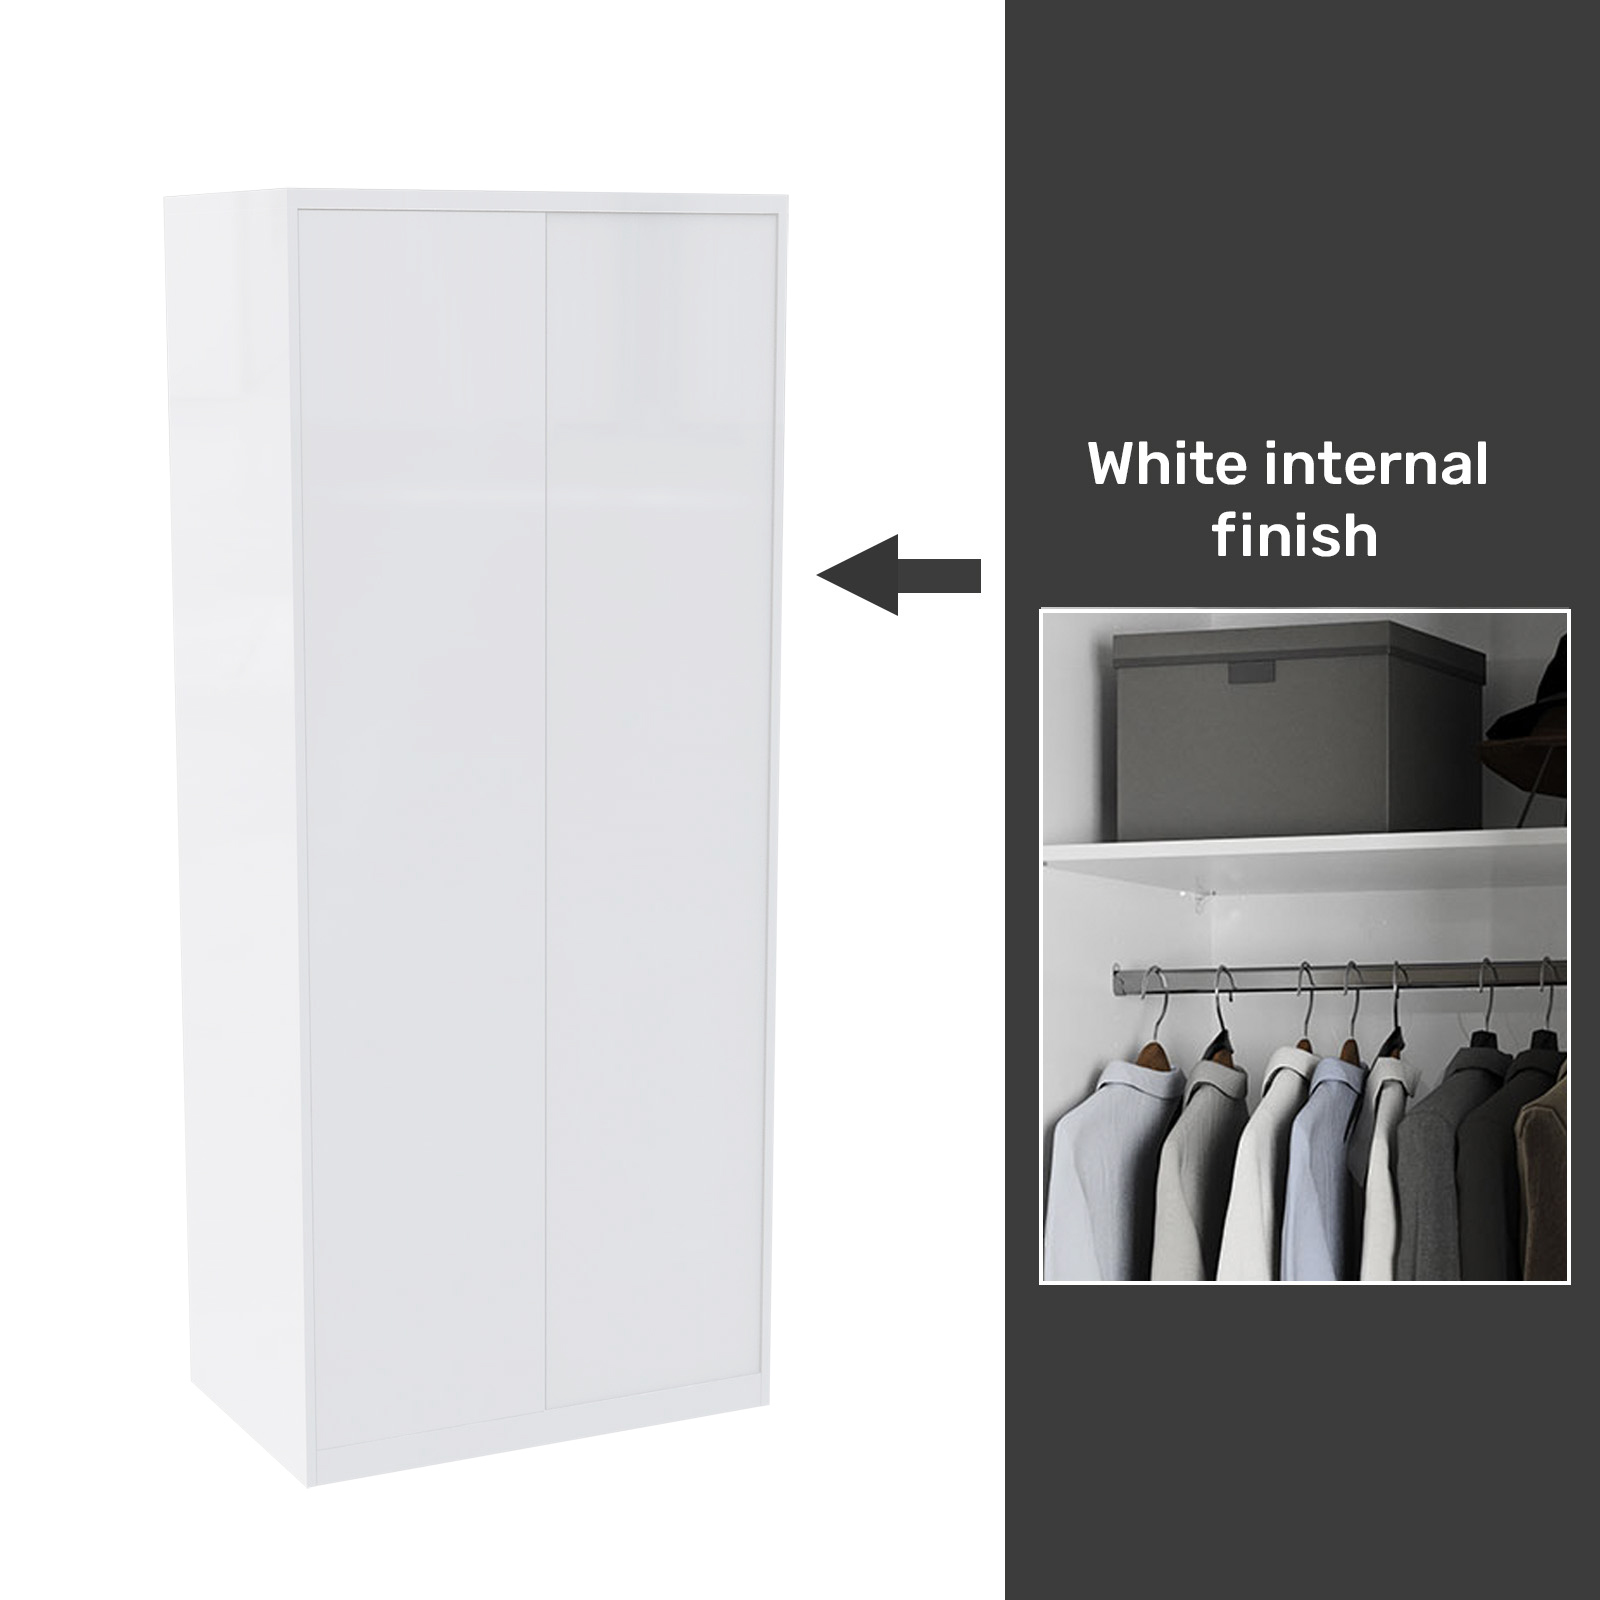 House Beautiful Honest Fitted Look Double Wardrobe, White Carcass - Gloss White Slab Doors (W) 940mm x (H) 2226mm